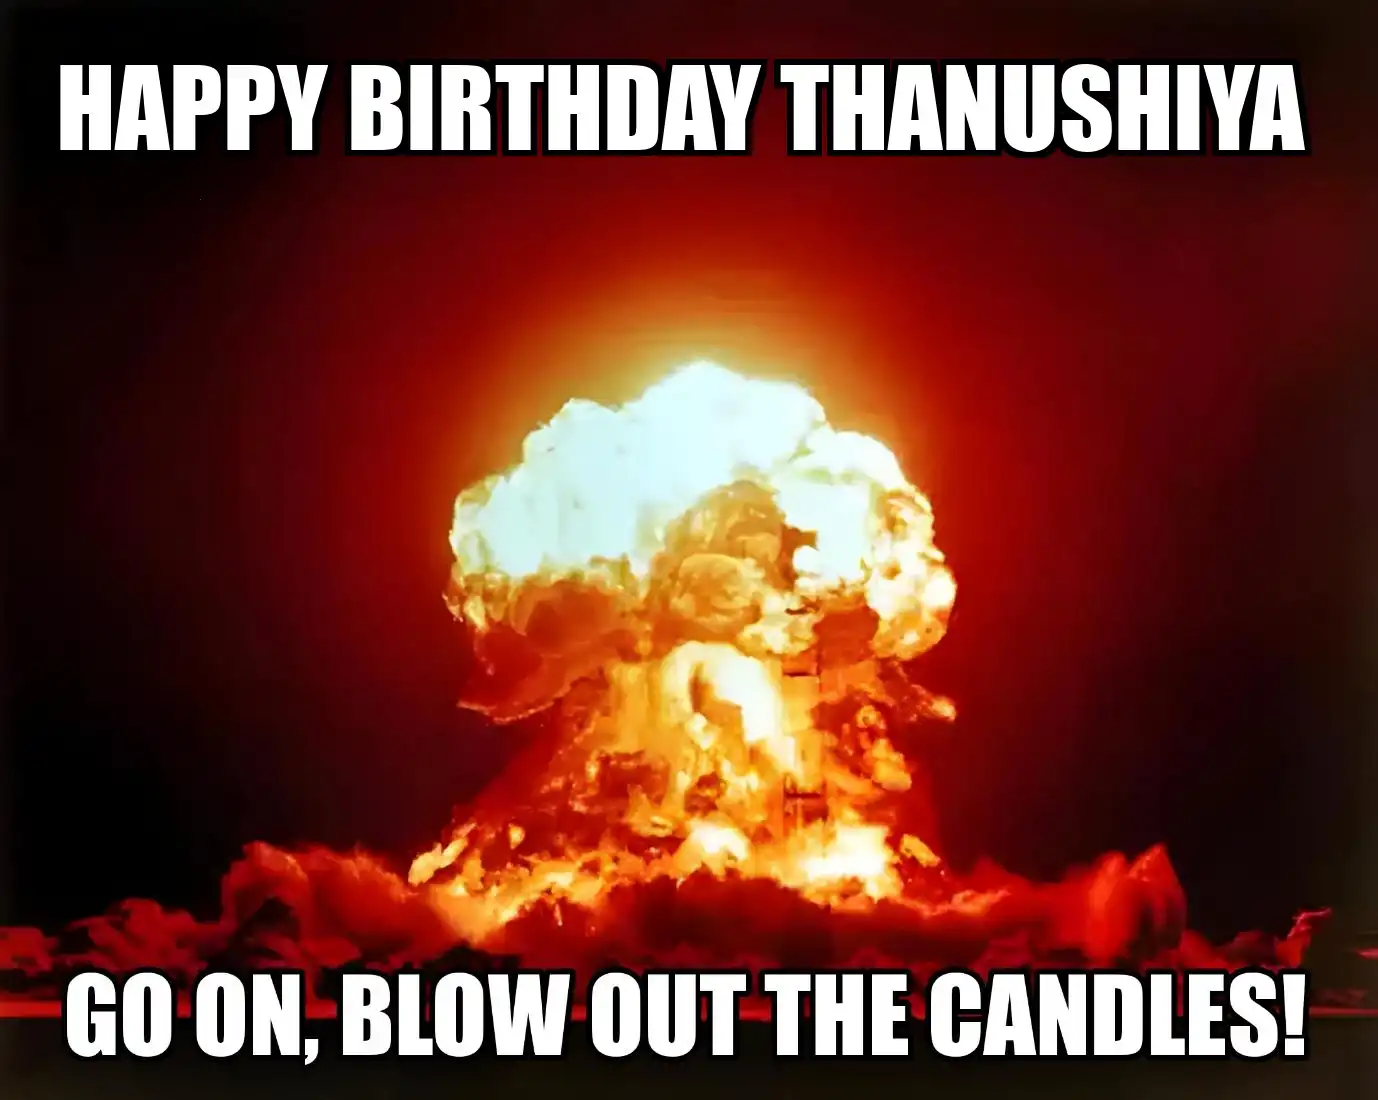 Happy Birthday Thanushiya Go On Blow Out The Candles Meme